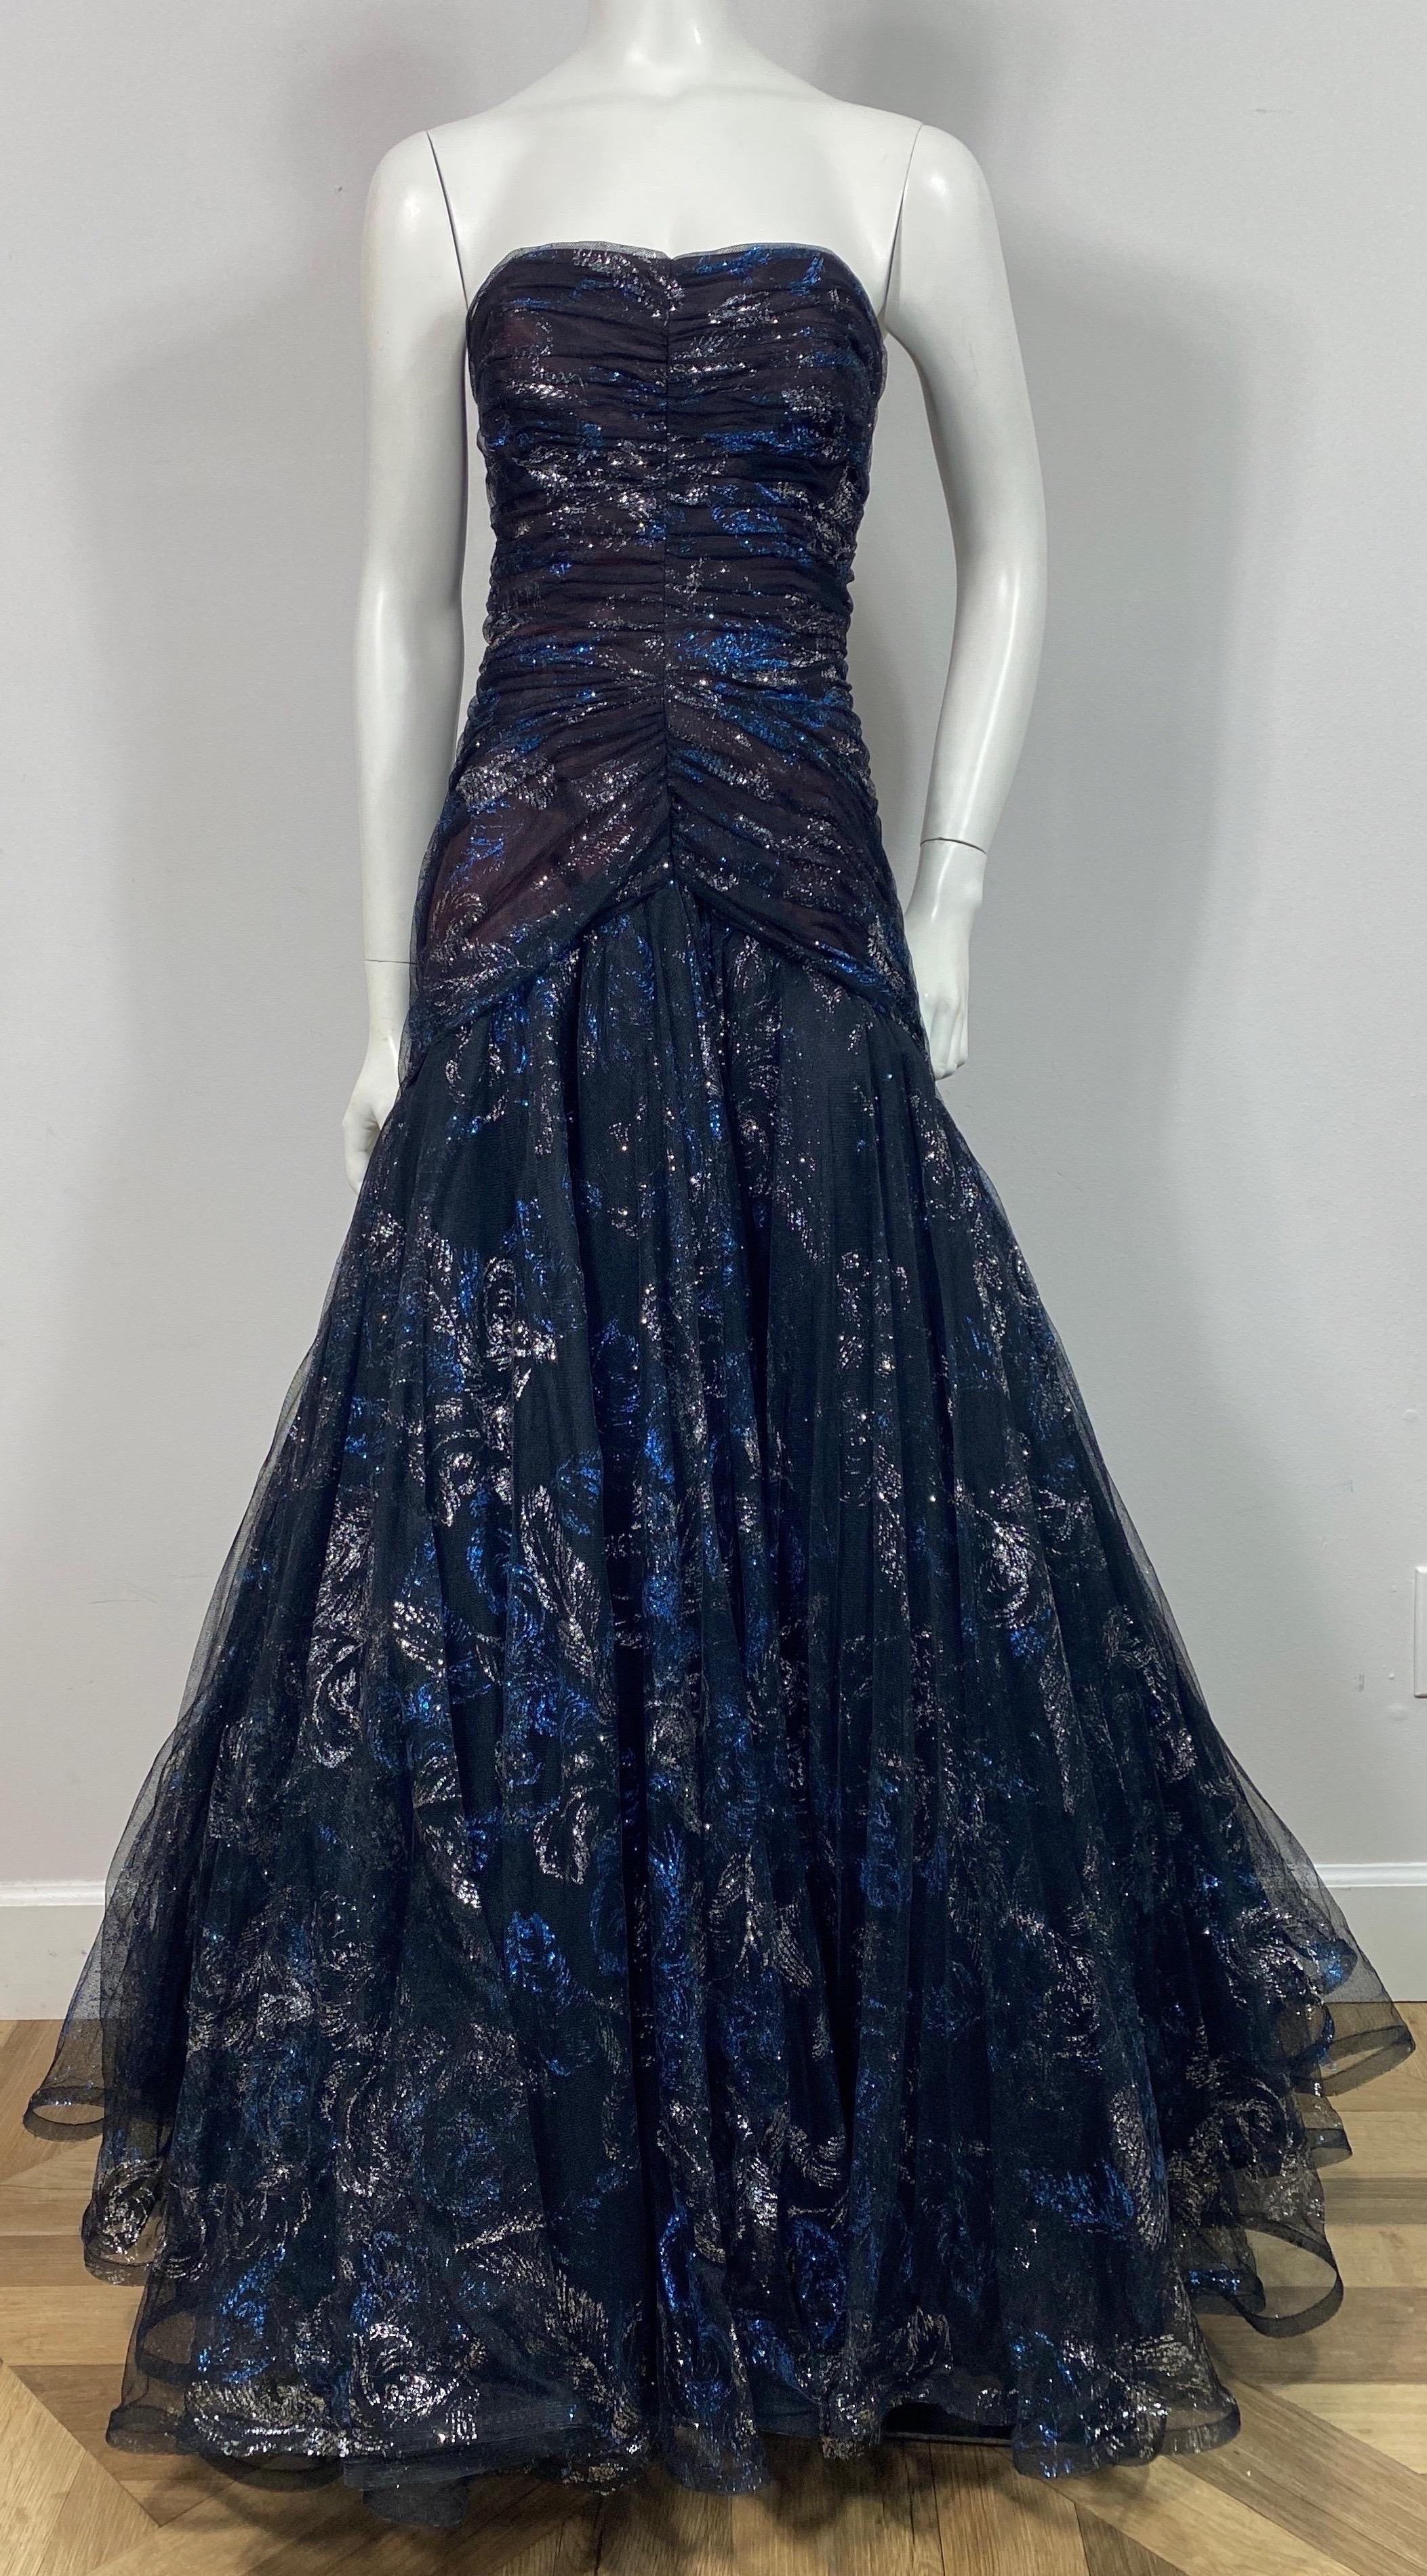 Murray Arbeid Early 1990’s Black Tulle with blue and silver metallic detail through the Gown - Size 8 This late 1980’s or Early 1990’s gown is made of multi layers of tulle and a Black Top Mesh fabric that has and electric metallic blue and silver